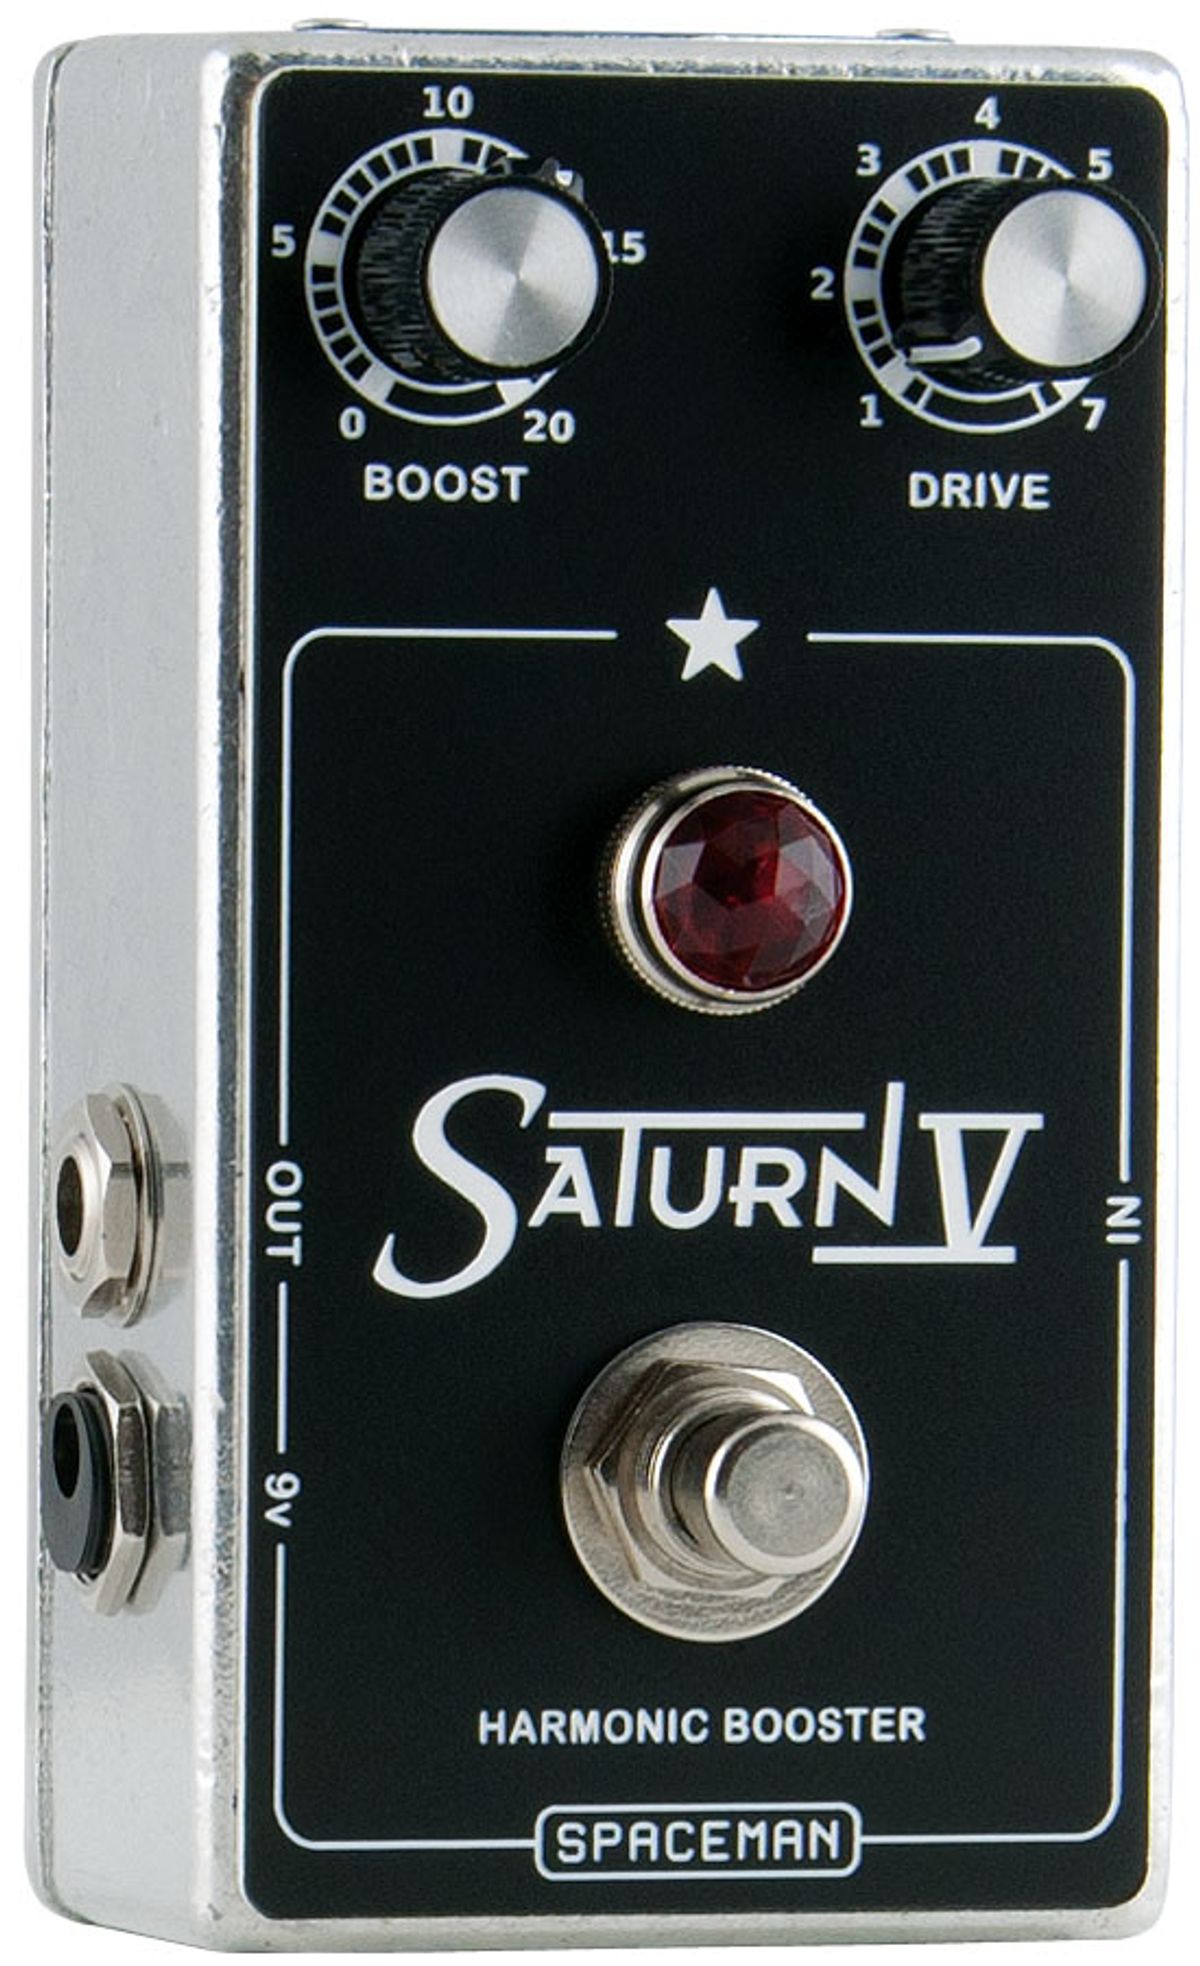 Spaceman Saturn V Harmonic Booster Pedal Review